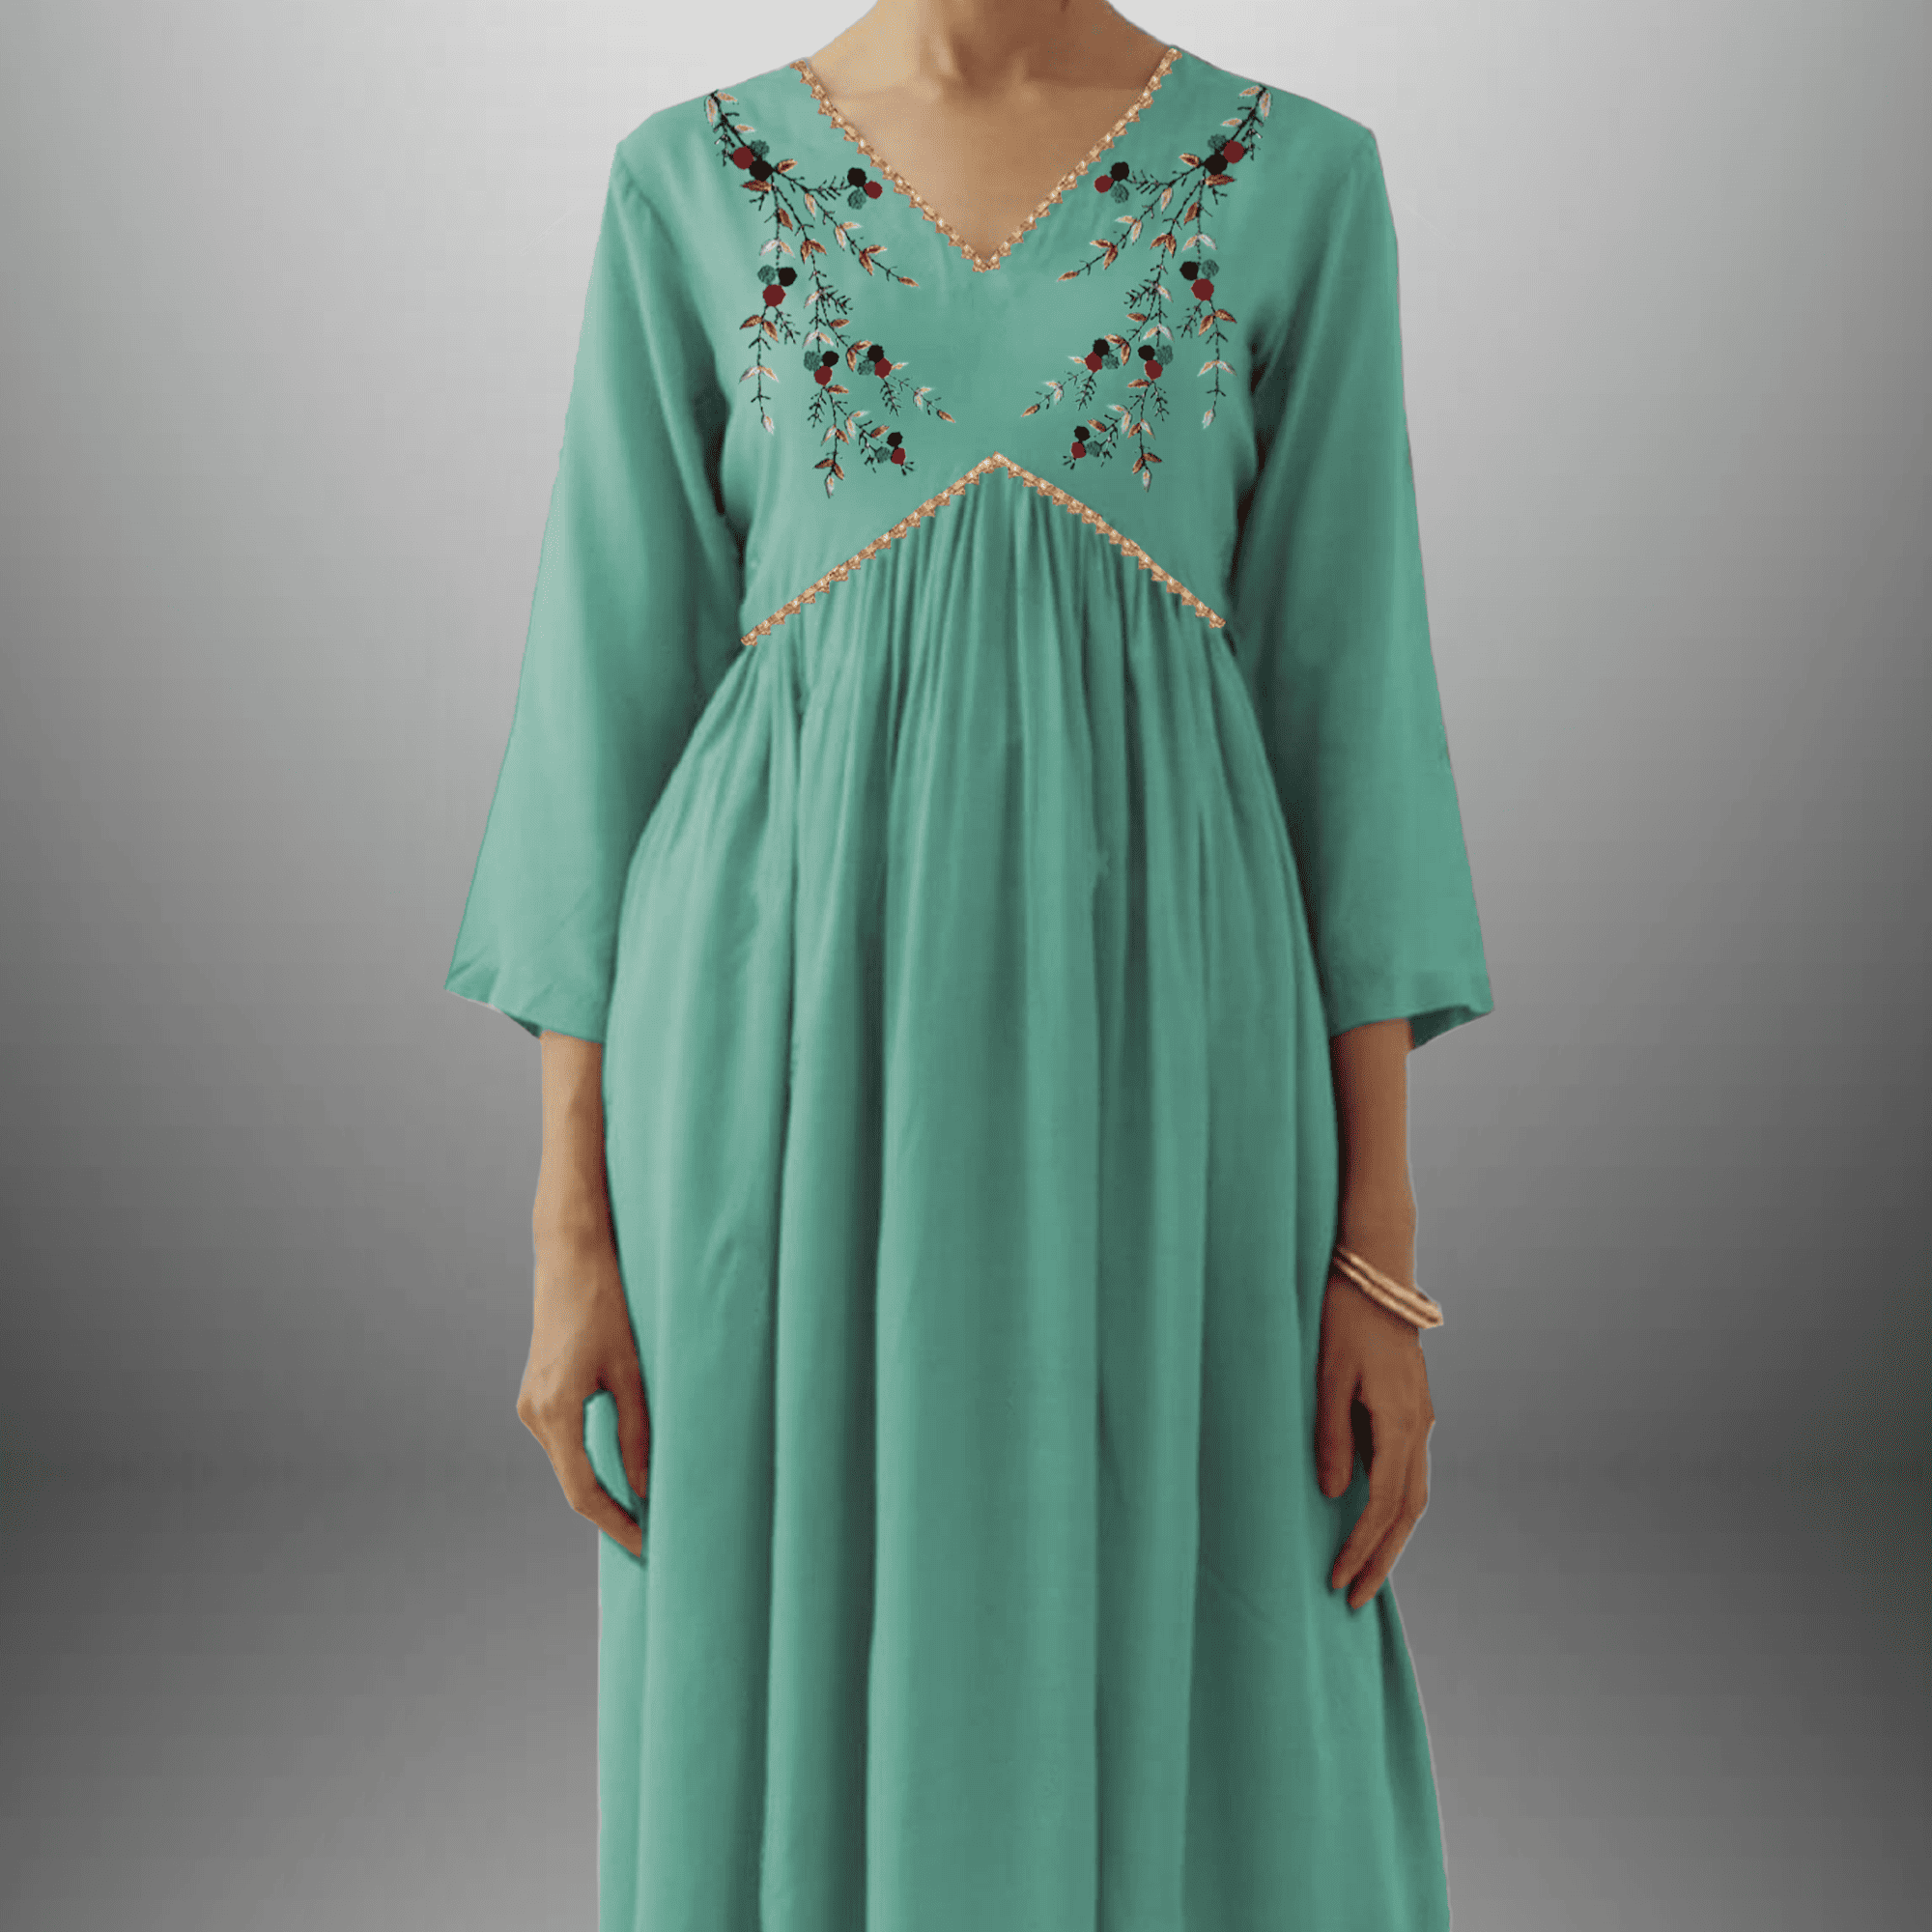 Women's  Mint Green Kurti set with Golden lace border and Embroidery on front-RWKS047